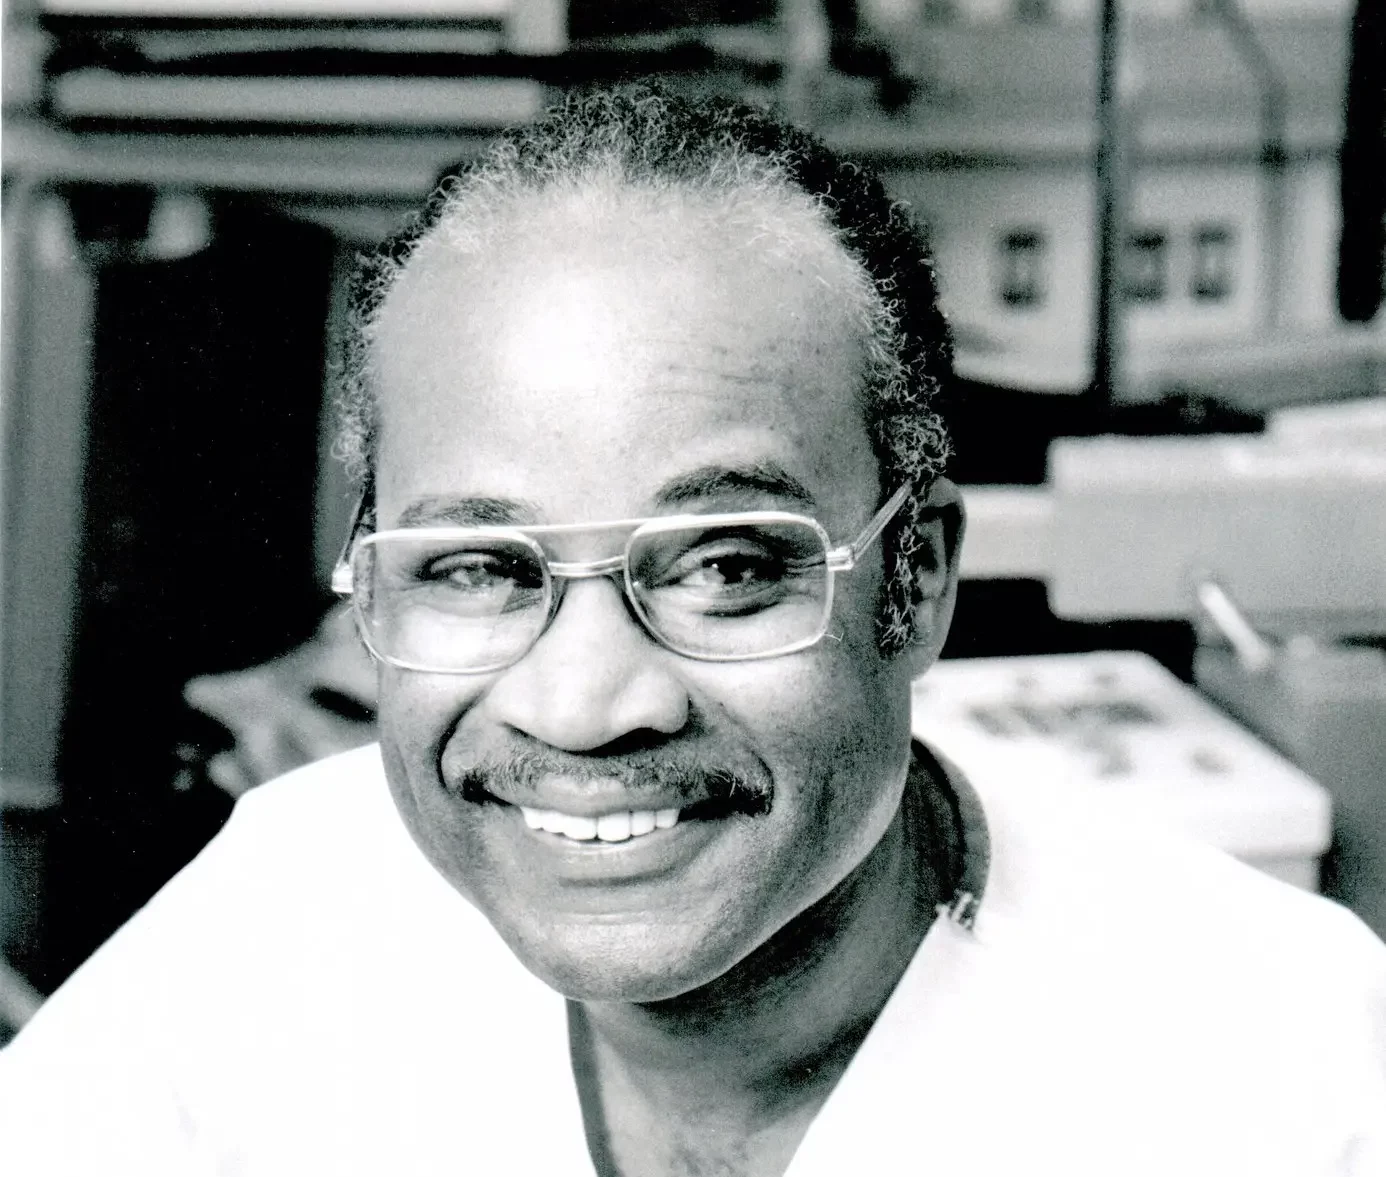 Dr. Kenneth Forde, the subject of the article in a black and white photo. Forde is smiling and wearing glasses. In the background is a surgical theater